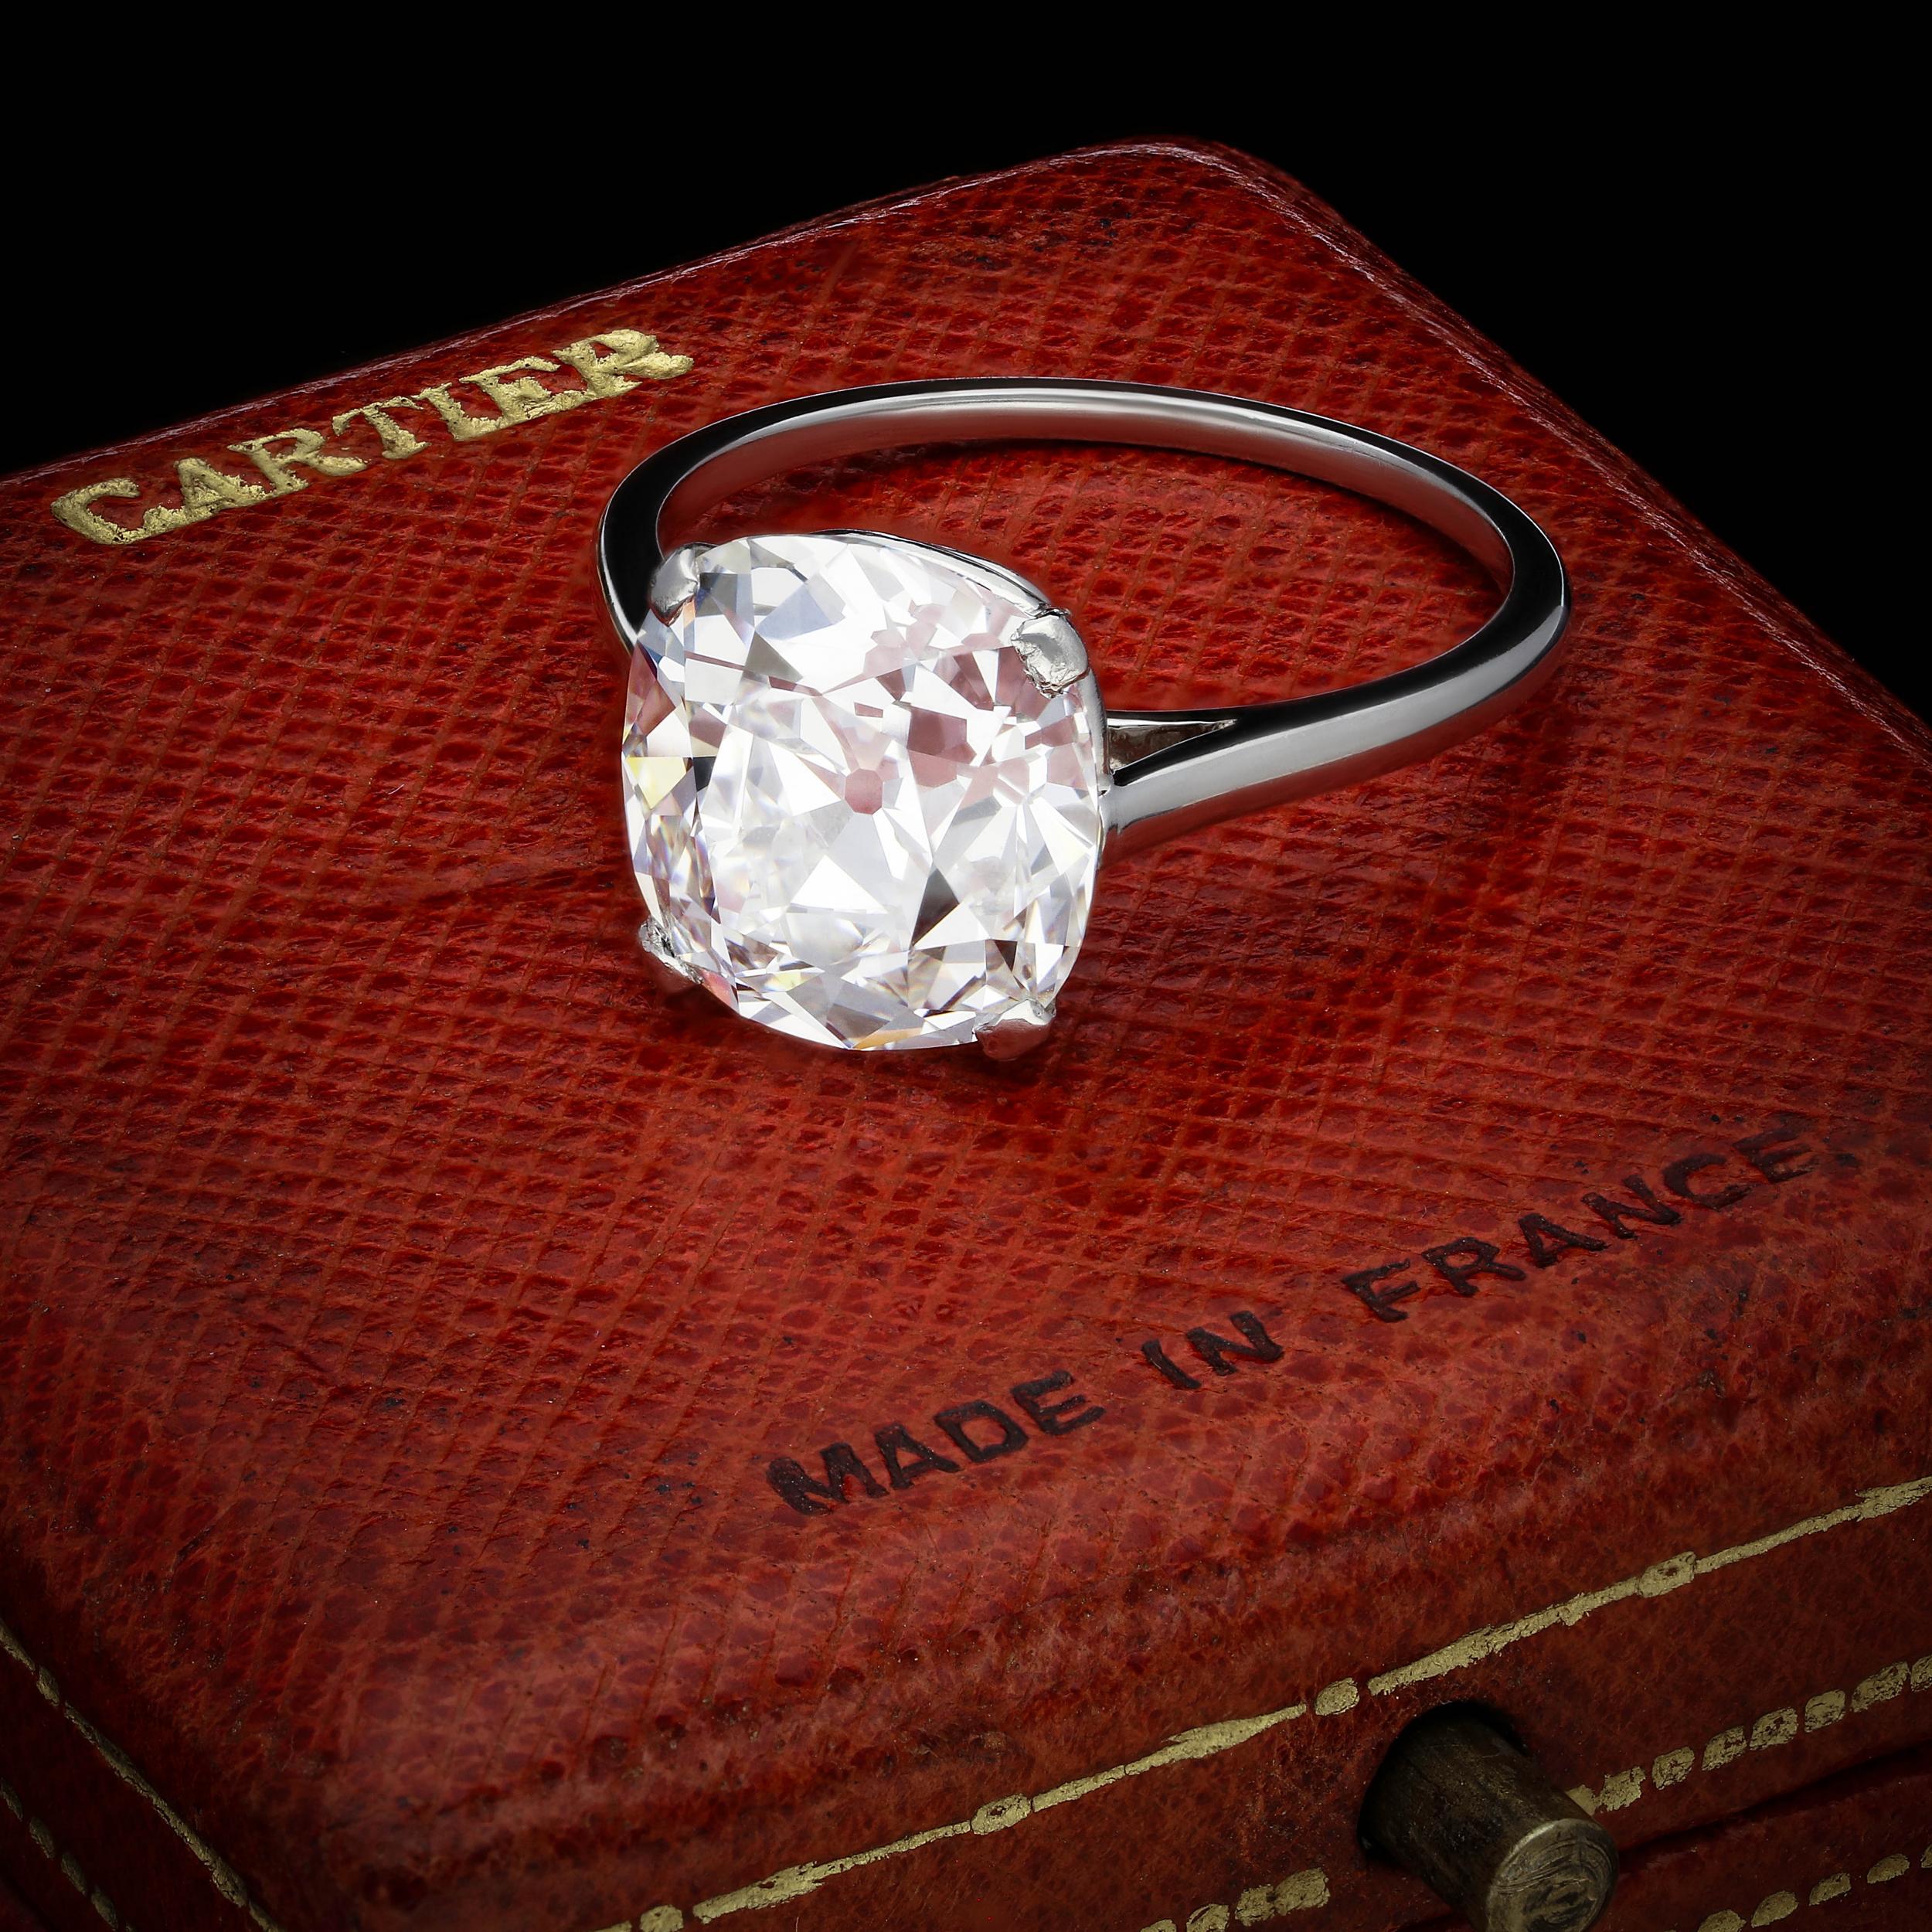 Description
A beautiful old cut diamond solitaire ring by Cartier c.1920s, set with a wonderful bright and lively cushion shaped old mine brilliant cut diamond weighing 4.21cts and of E colour and VS1 clarity, claw set in platinum to a very simple